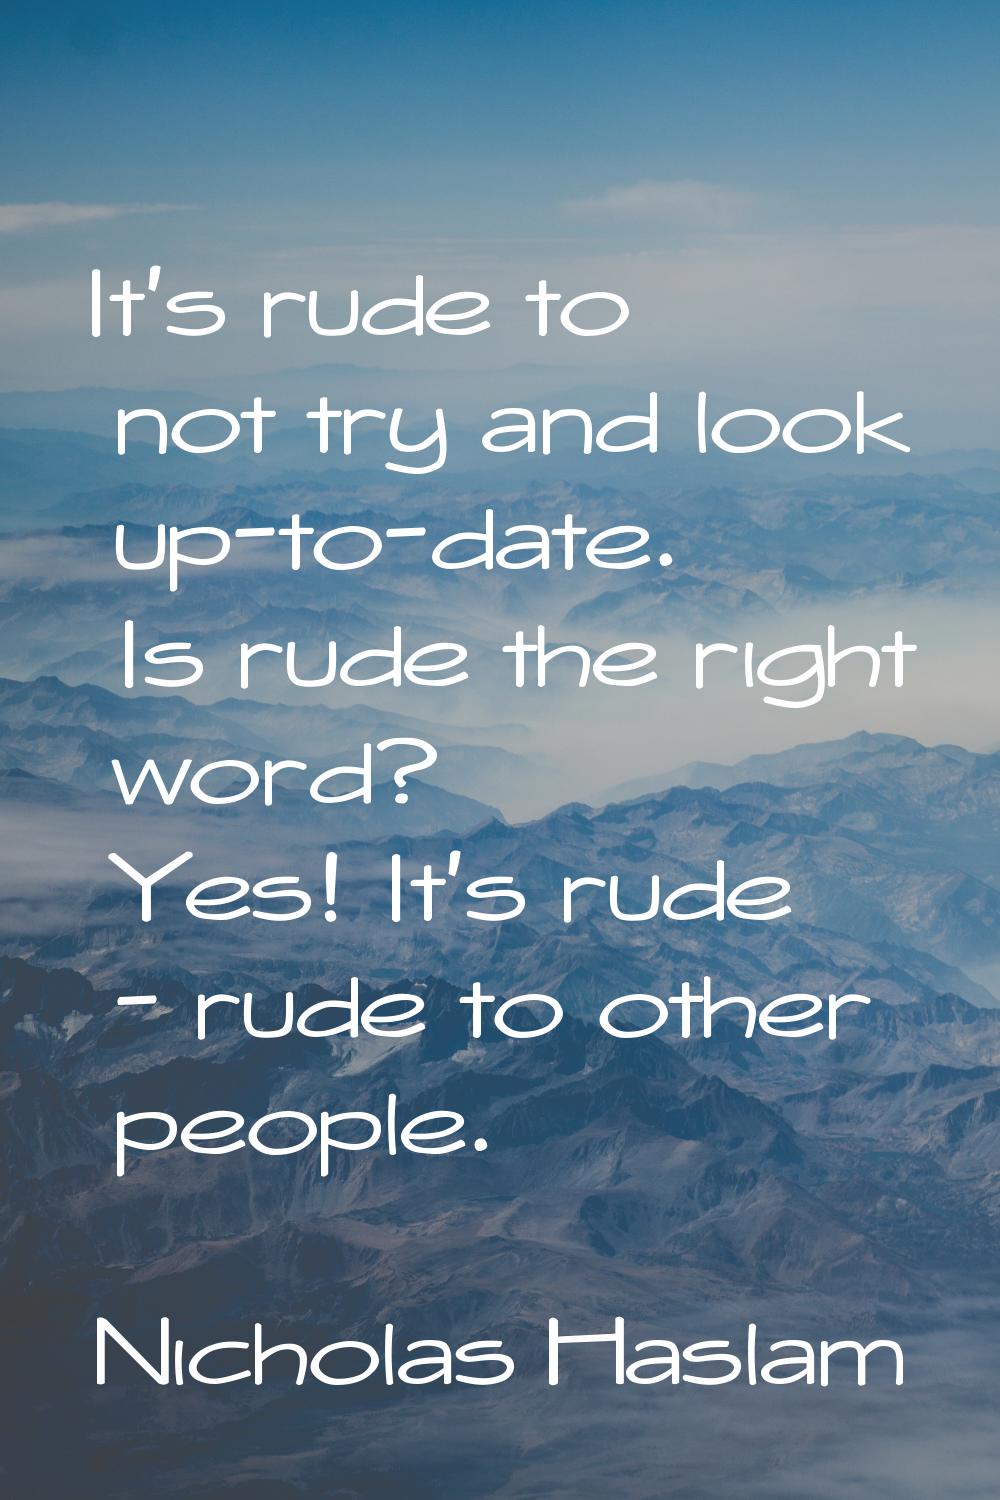 It's rude to not try and look up-to-date. Is rude the right word? Yes! It's rude - rude to other pe